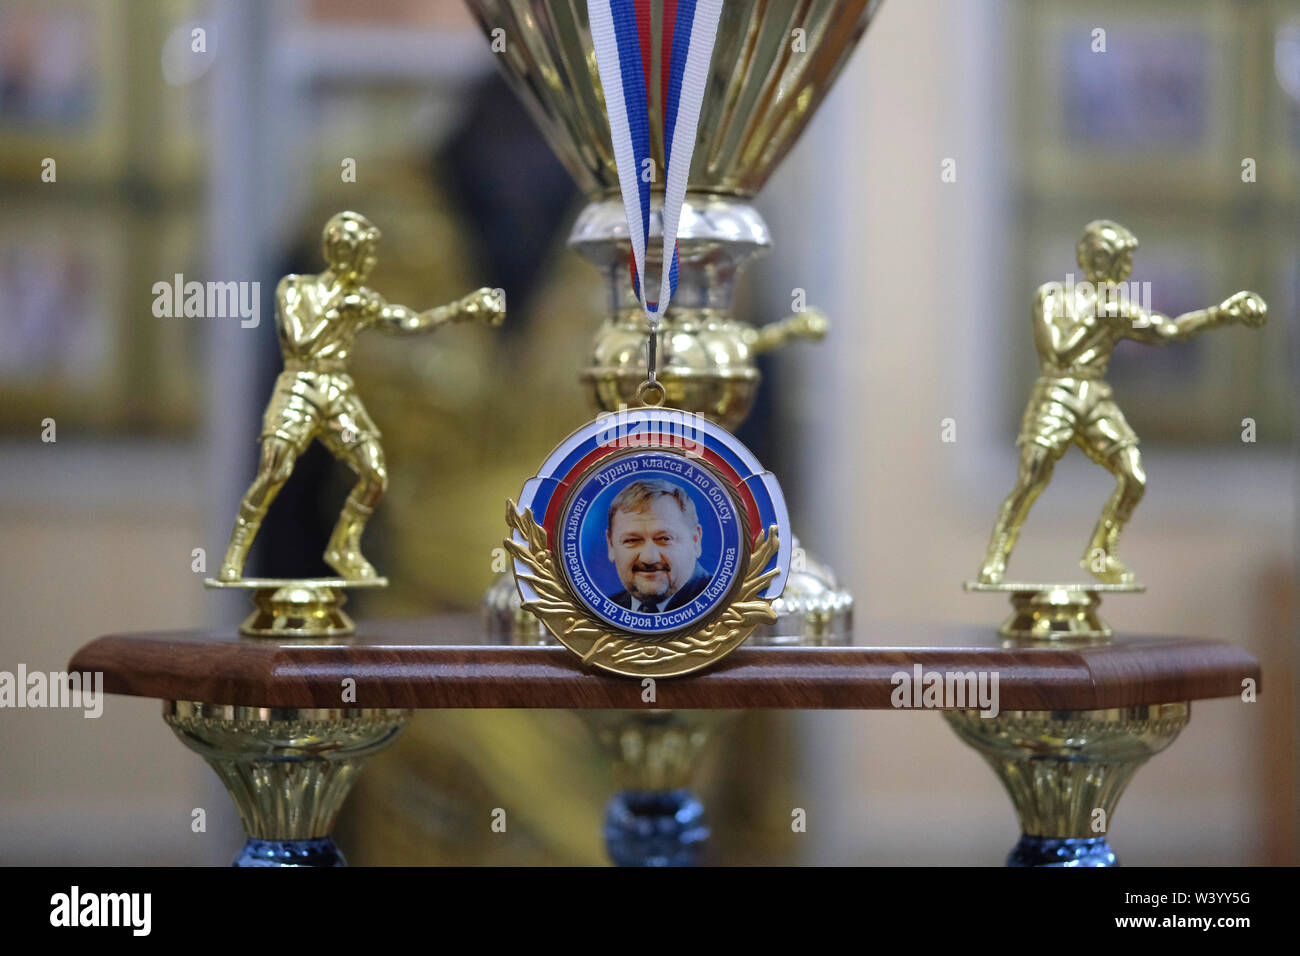 The image of Akhmad Kadyrov former Head of the Chechen Republic decorates a gilded boxing trophy displayed at Akhmat Kadyrov museum overwhelmingly a shrine to Akhmat and Ramzan Kadyrov in Grozny the capital city of Chechnya in the North Caucasian Federal District of Russia. Stock Photo